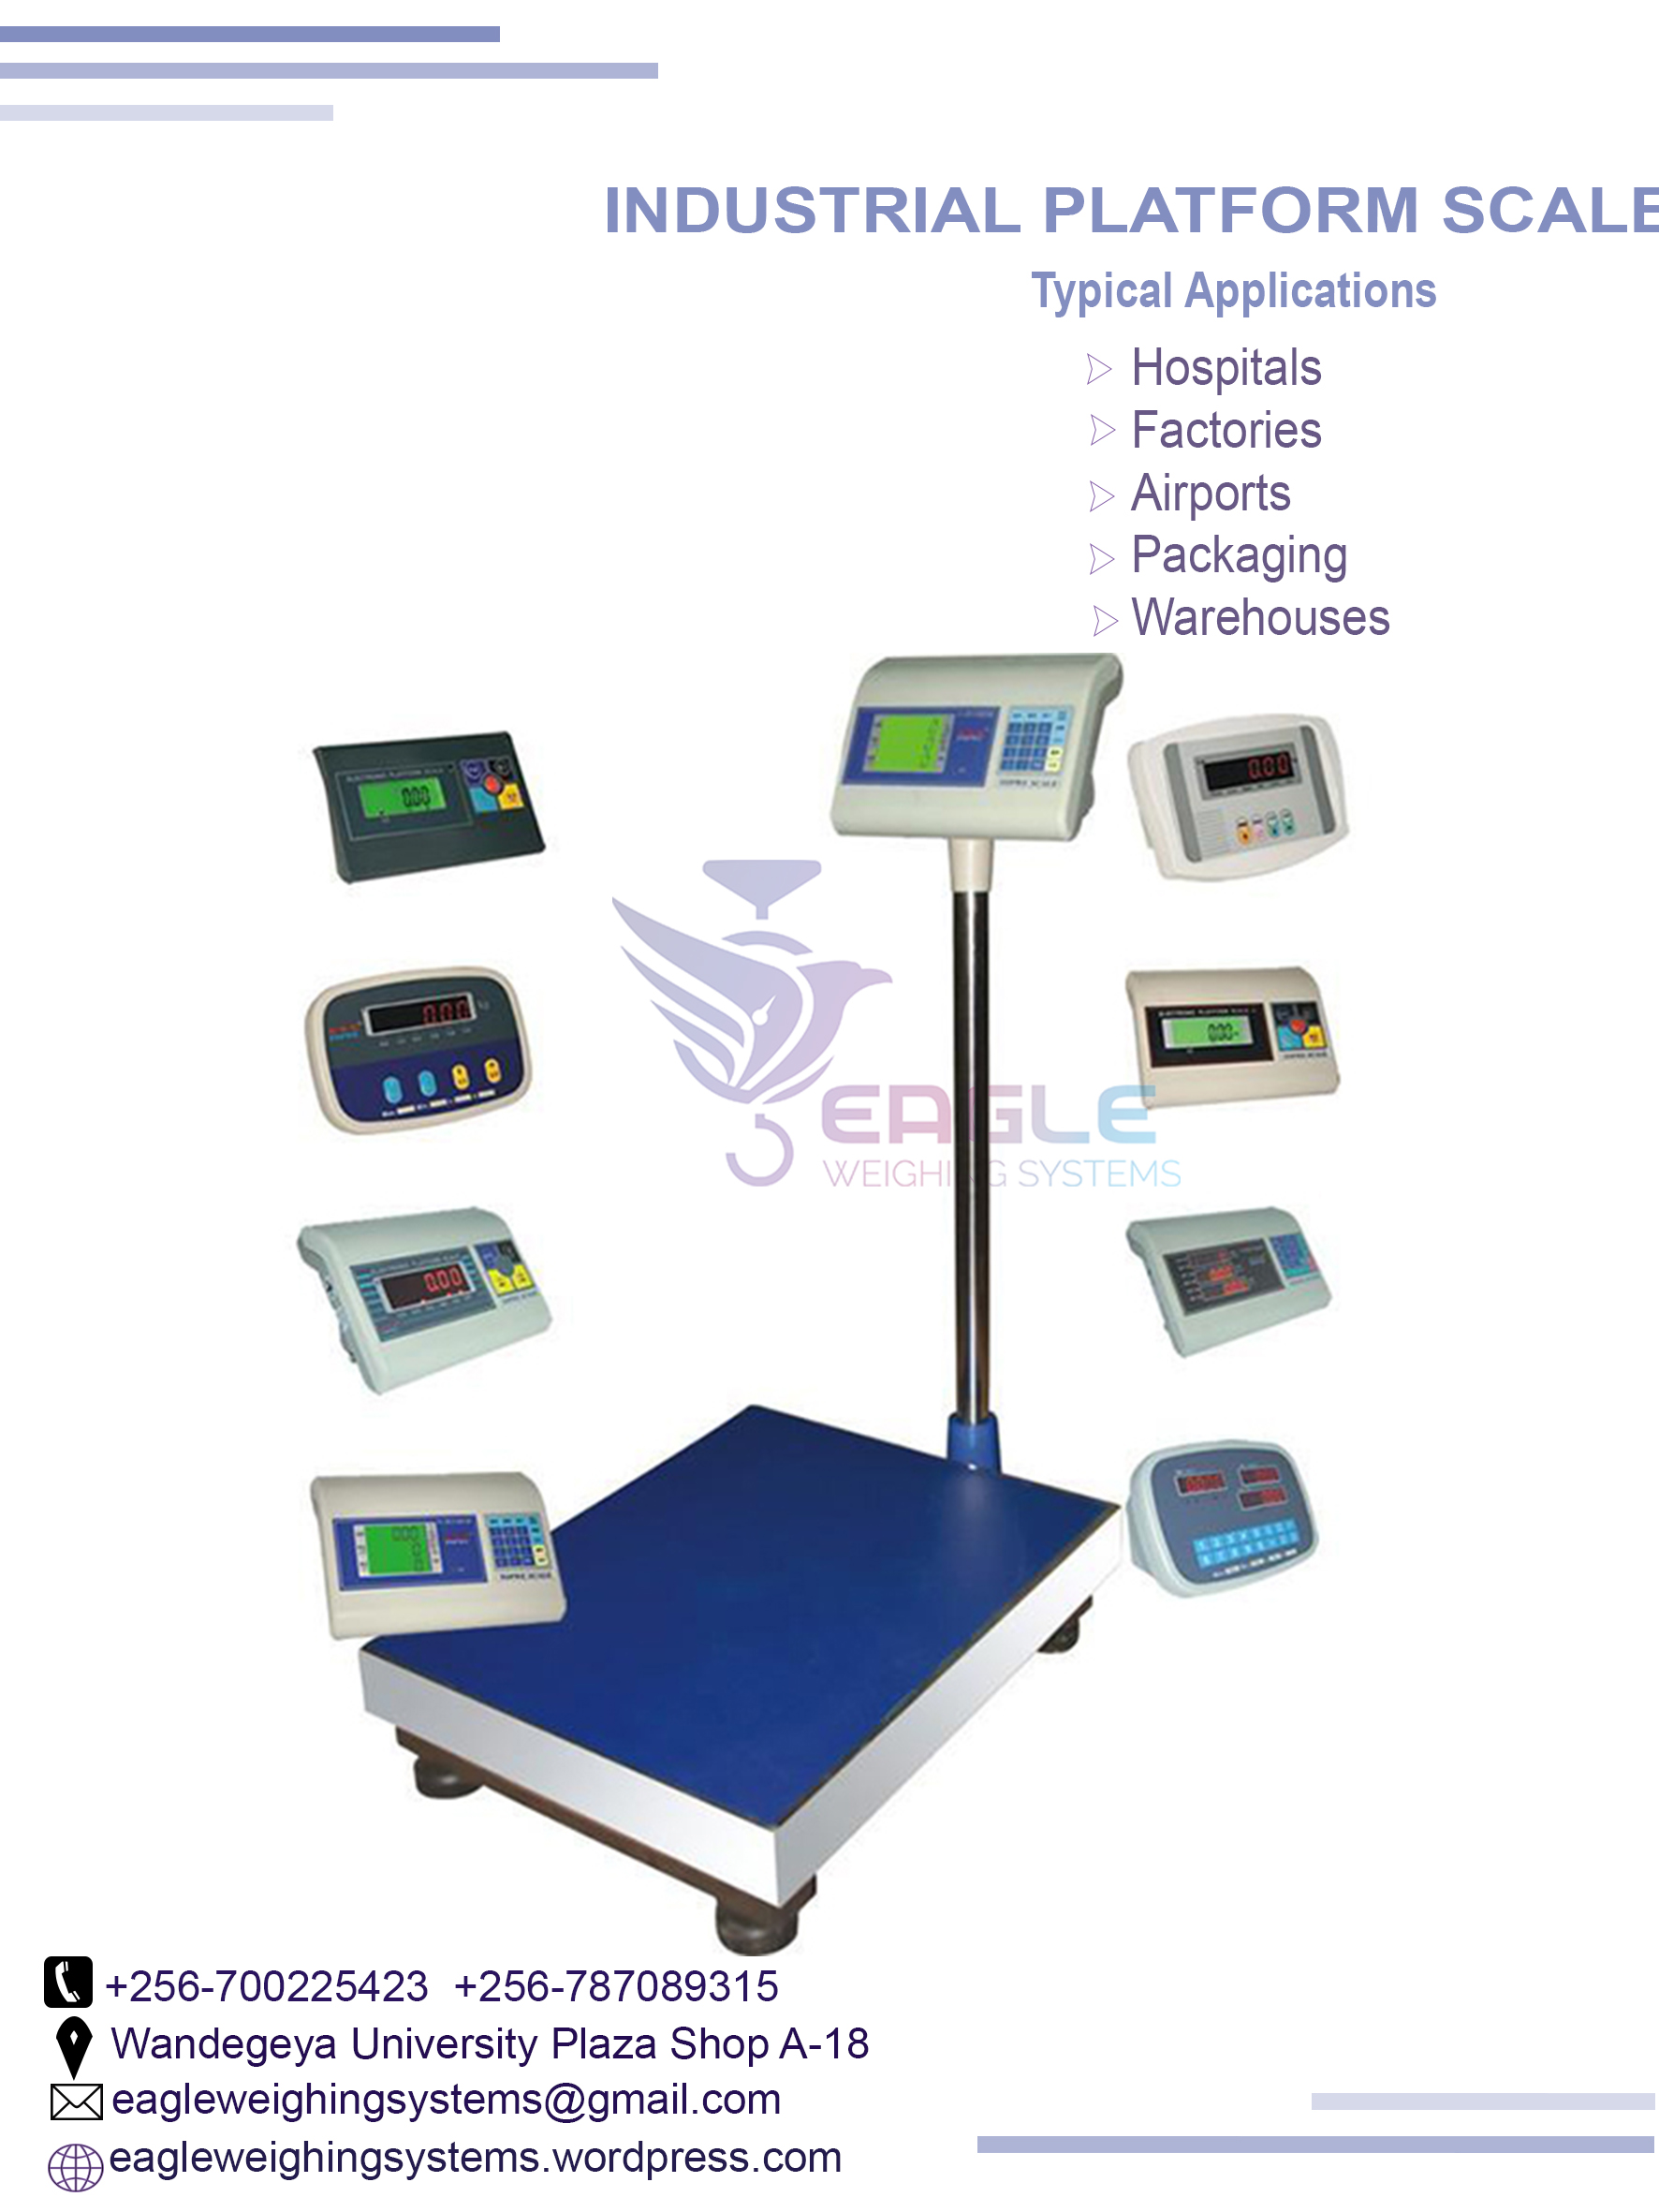 Low Price Guaranteed Quality stainless electronic platform scale, Kampala Central Division, Central, Uganda